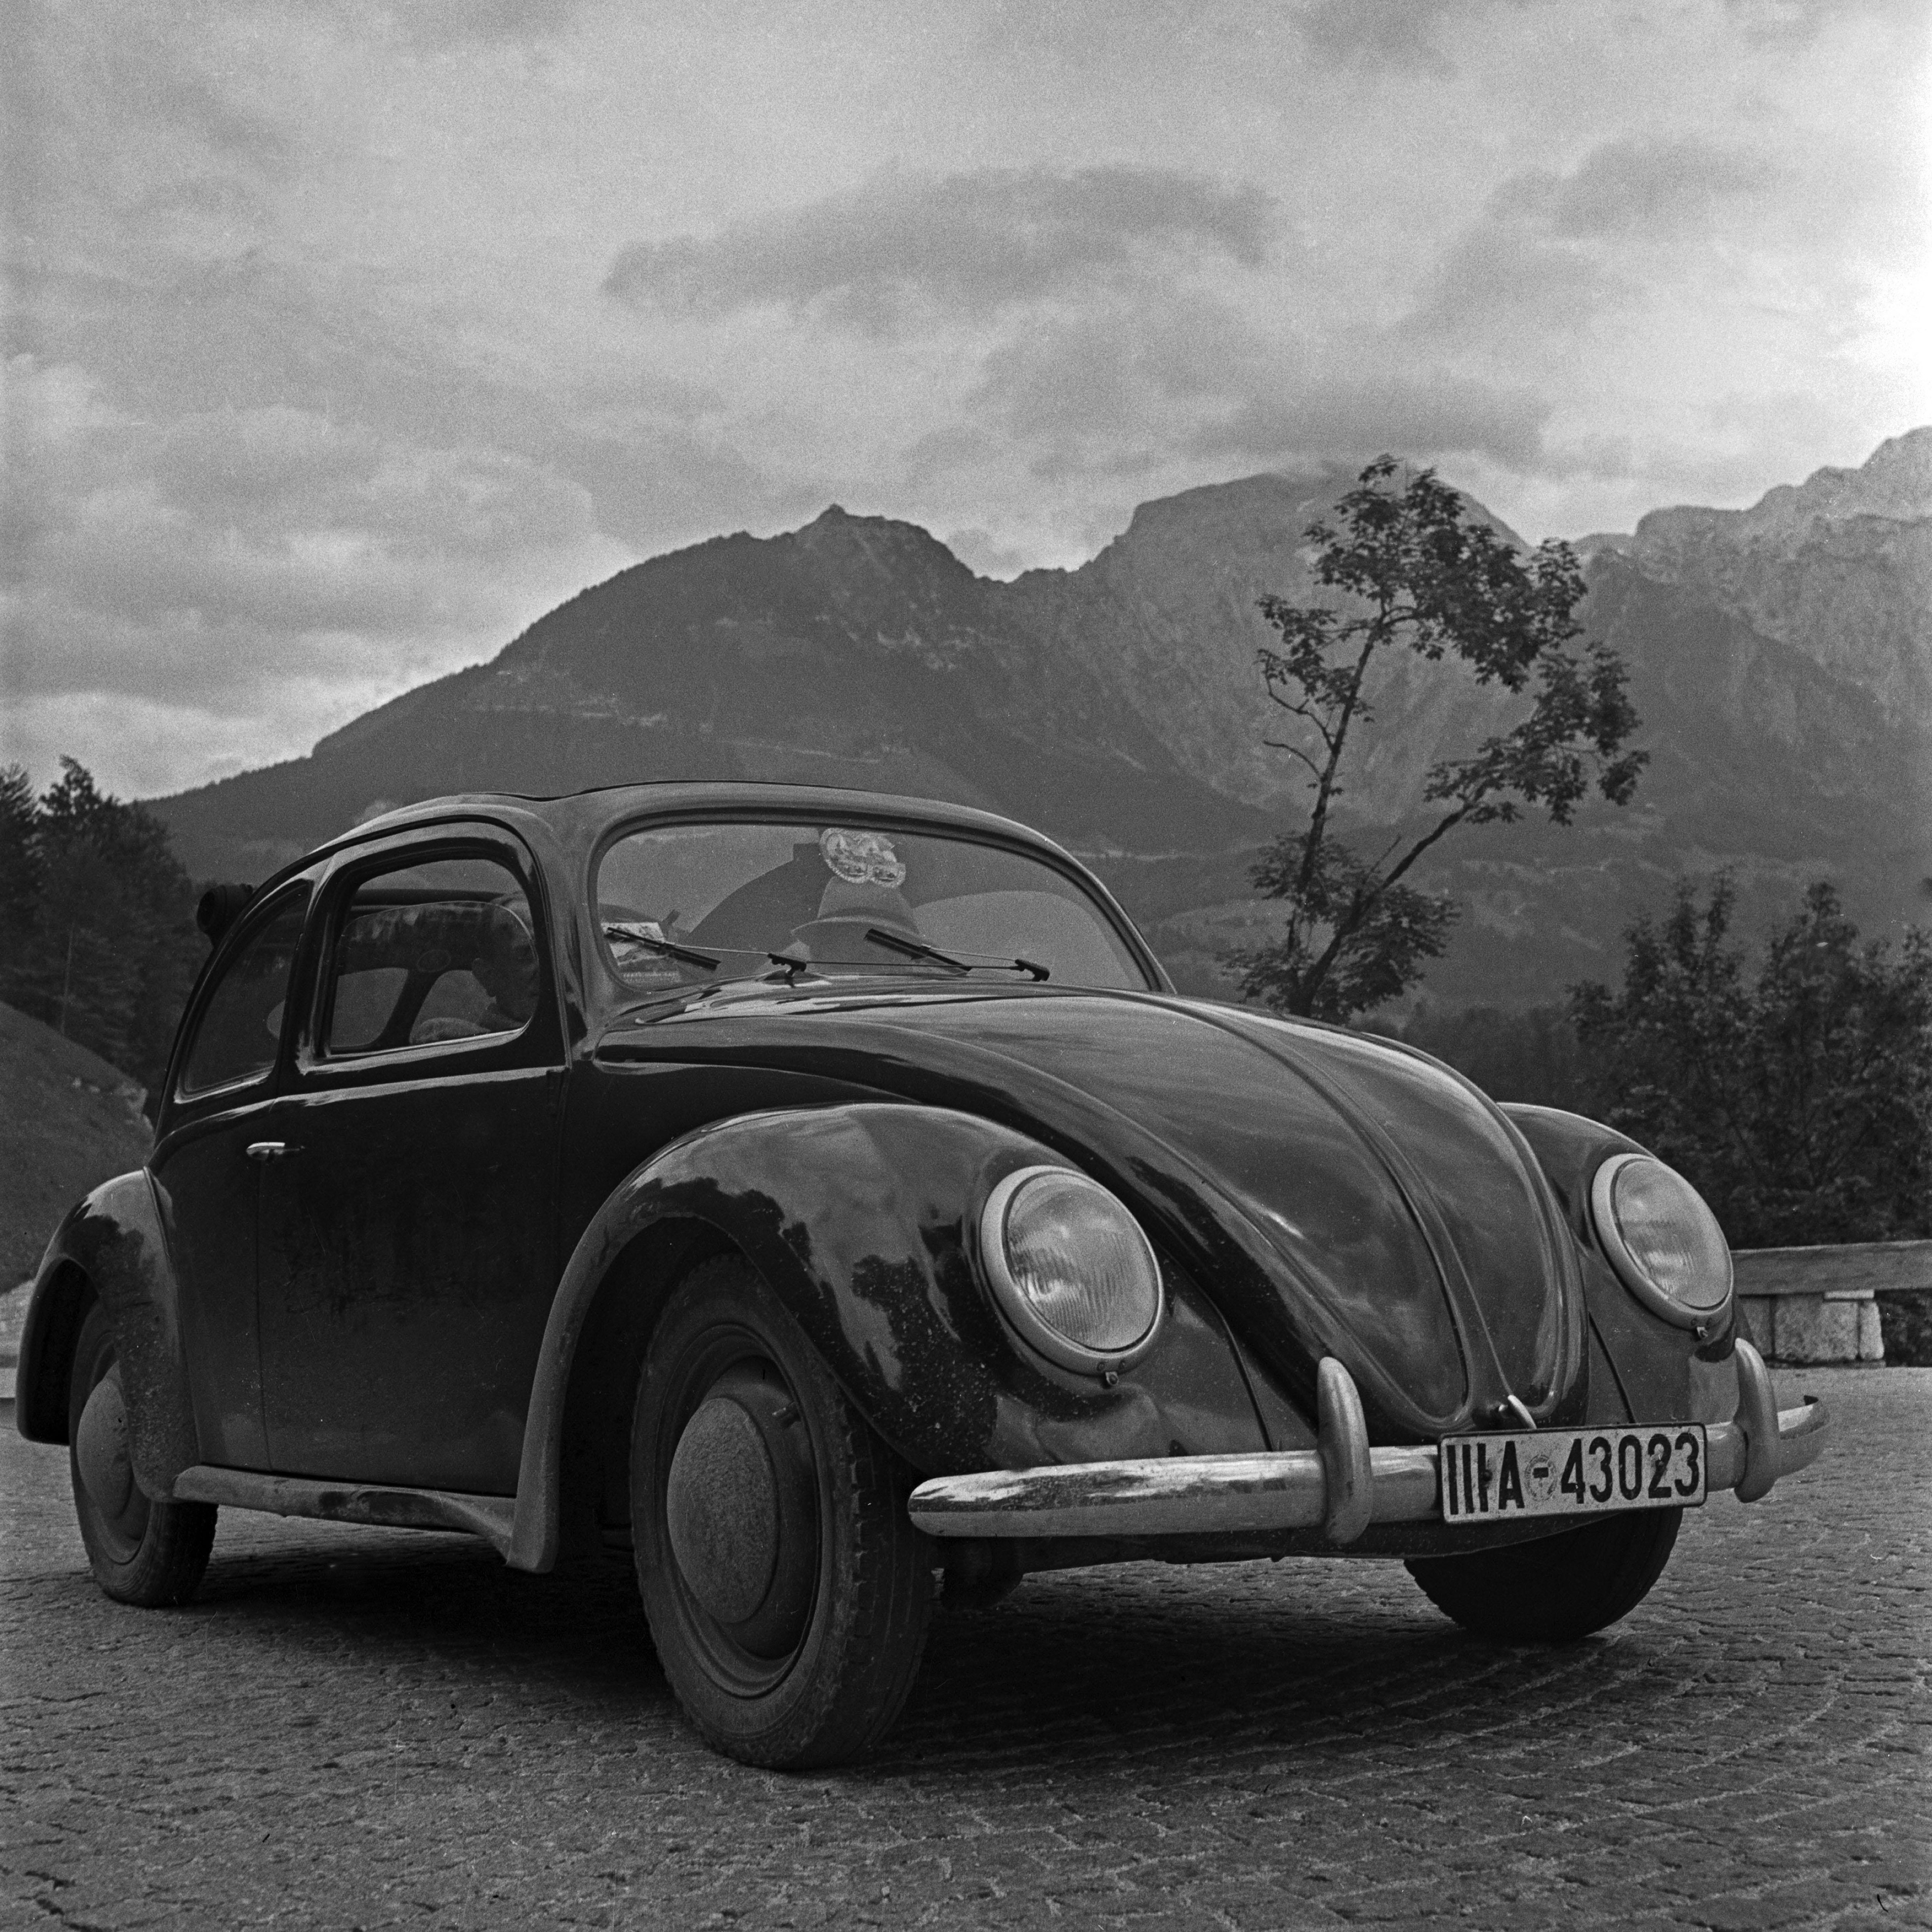 Karl Heinrich Lämmel Black and White Photograph - Volkswagen beetle parking close to mountains, Germany 1939 Printed Later 